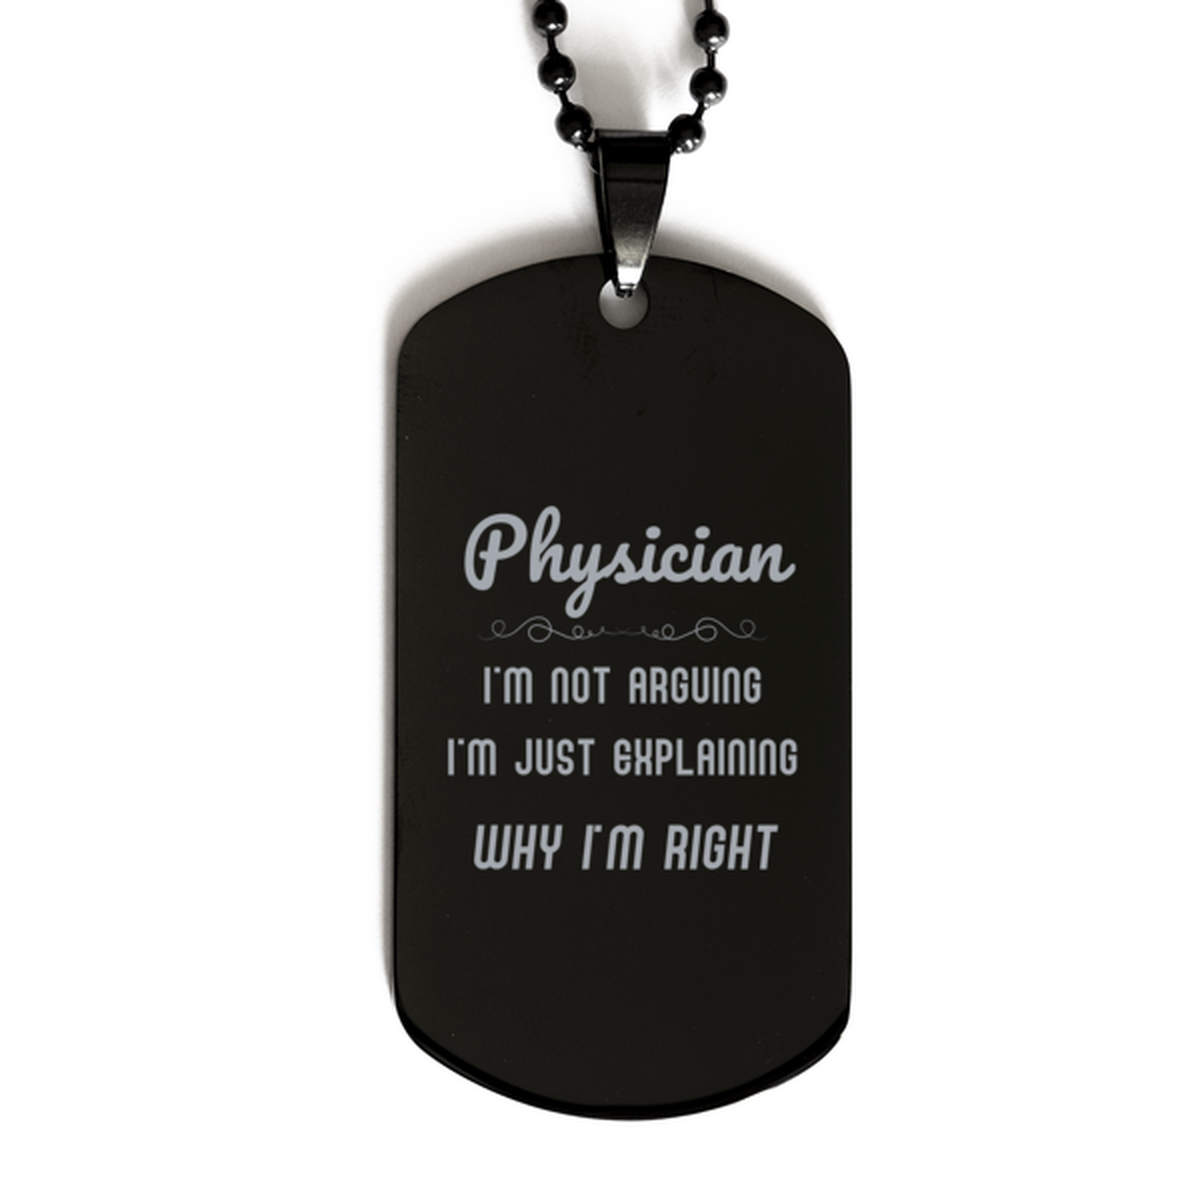 Physician I'm not Arguing. I'm Just Explaining Why I'm RIGHT Black Dog Tag, Funny Saying Quote Physician Gifts For Physician Graduation Birthday Christmas Gifts for Men Women Coworker